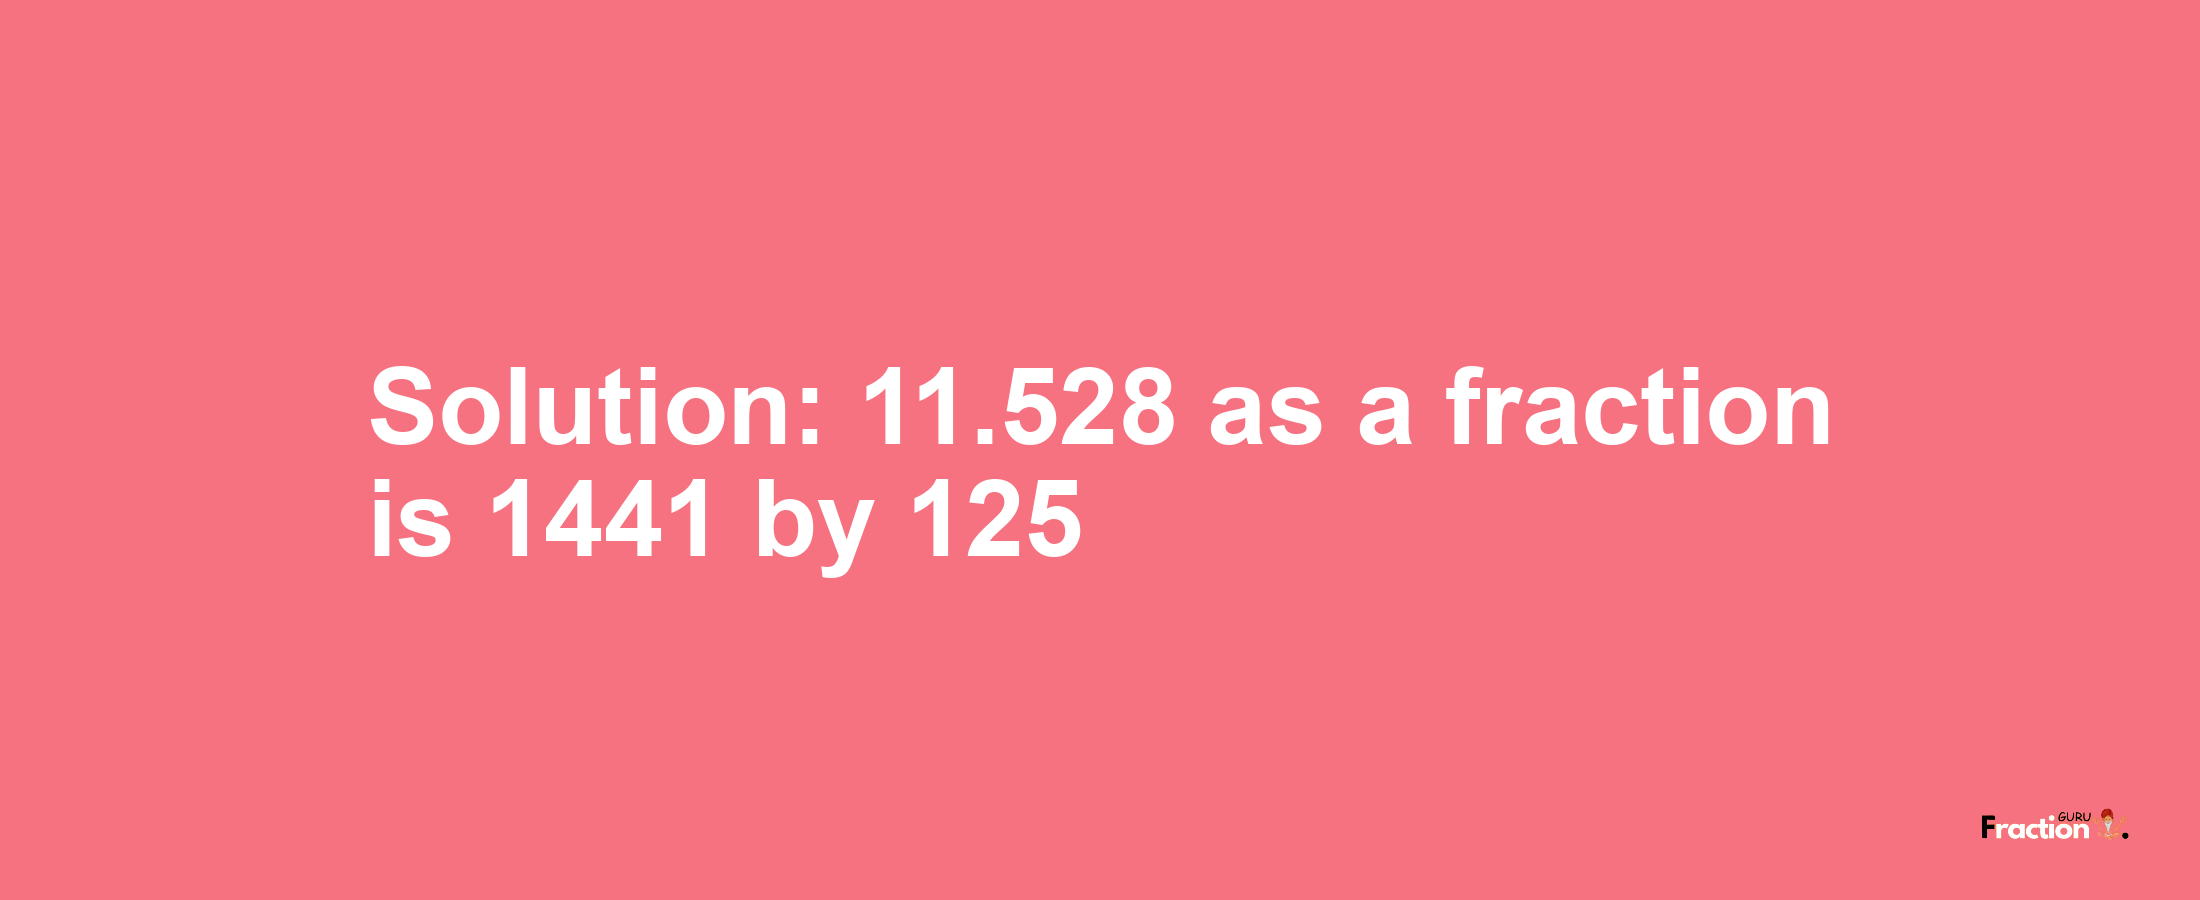 Solution:11.528 as a fraction is 1441/125